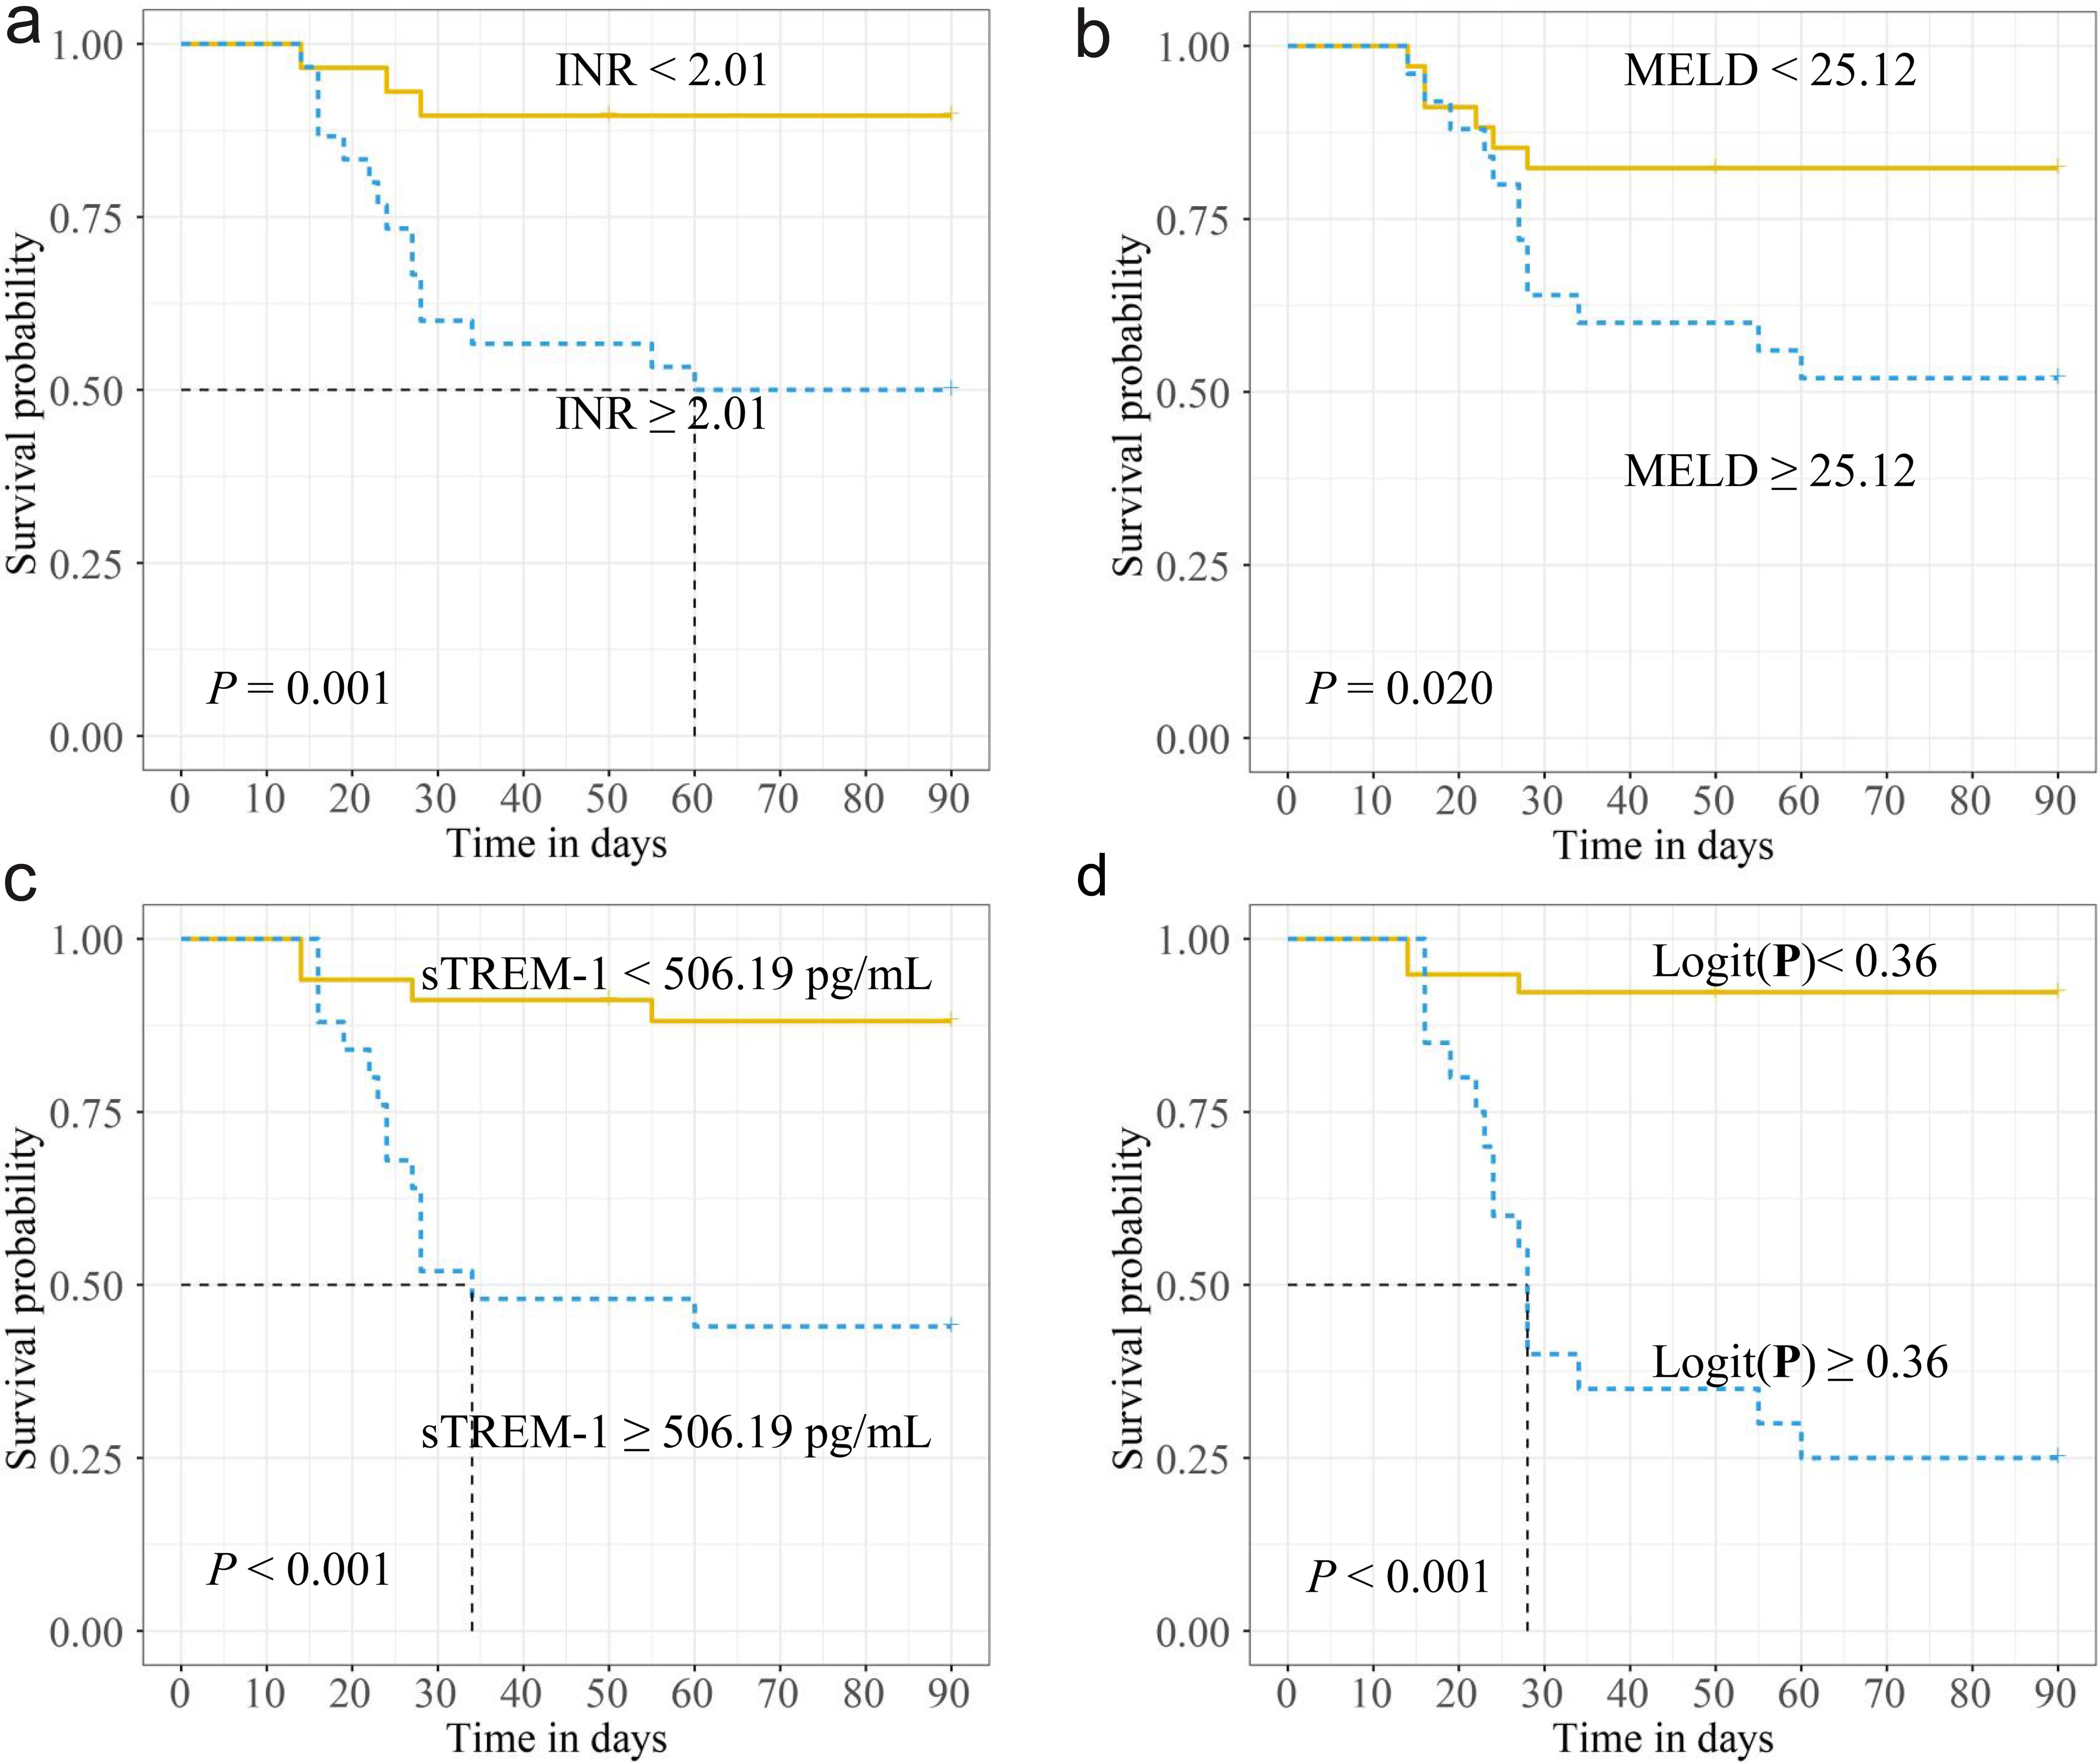 (a) Kaplan-Meier survival curves for patients with INR ≥2.01 and INR <2.01; (b) Kaplan-Meier survival curves for patients with MELD score ≥25.12 and MELD score <25.12; (c) Kaplan-Meier survival curves for patients with sTREM-1 ≥506.19 pg/mL and sTREM-1 <506.19 pg/mL; (d) Kaplan-Meier survival curves for patients with logistic regression analysis equation logit (<italic>p</italic>) of <italic>p</italic> < 0.36 and <italic>p</italic> ≥ 0.36.